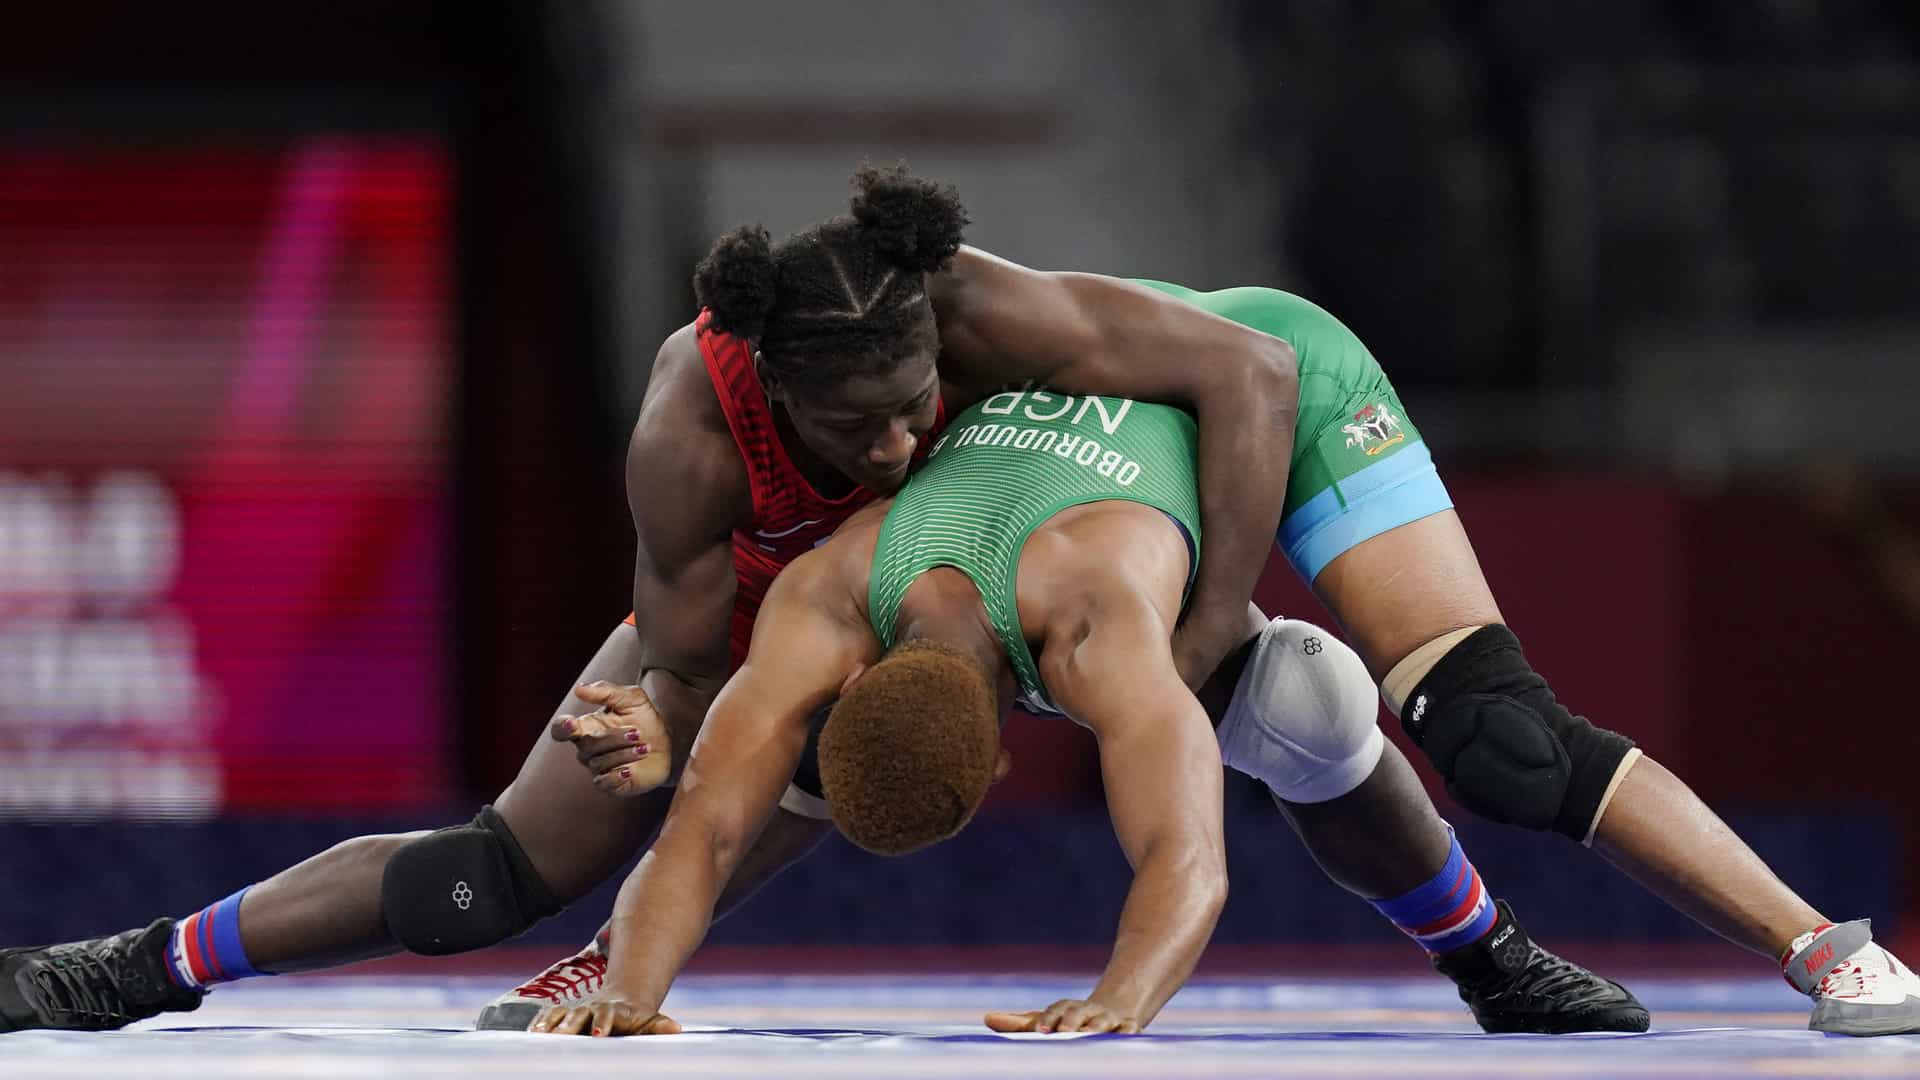 Olympic Wrestling Day 11: USA's Mensah Stock Takes Gold